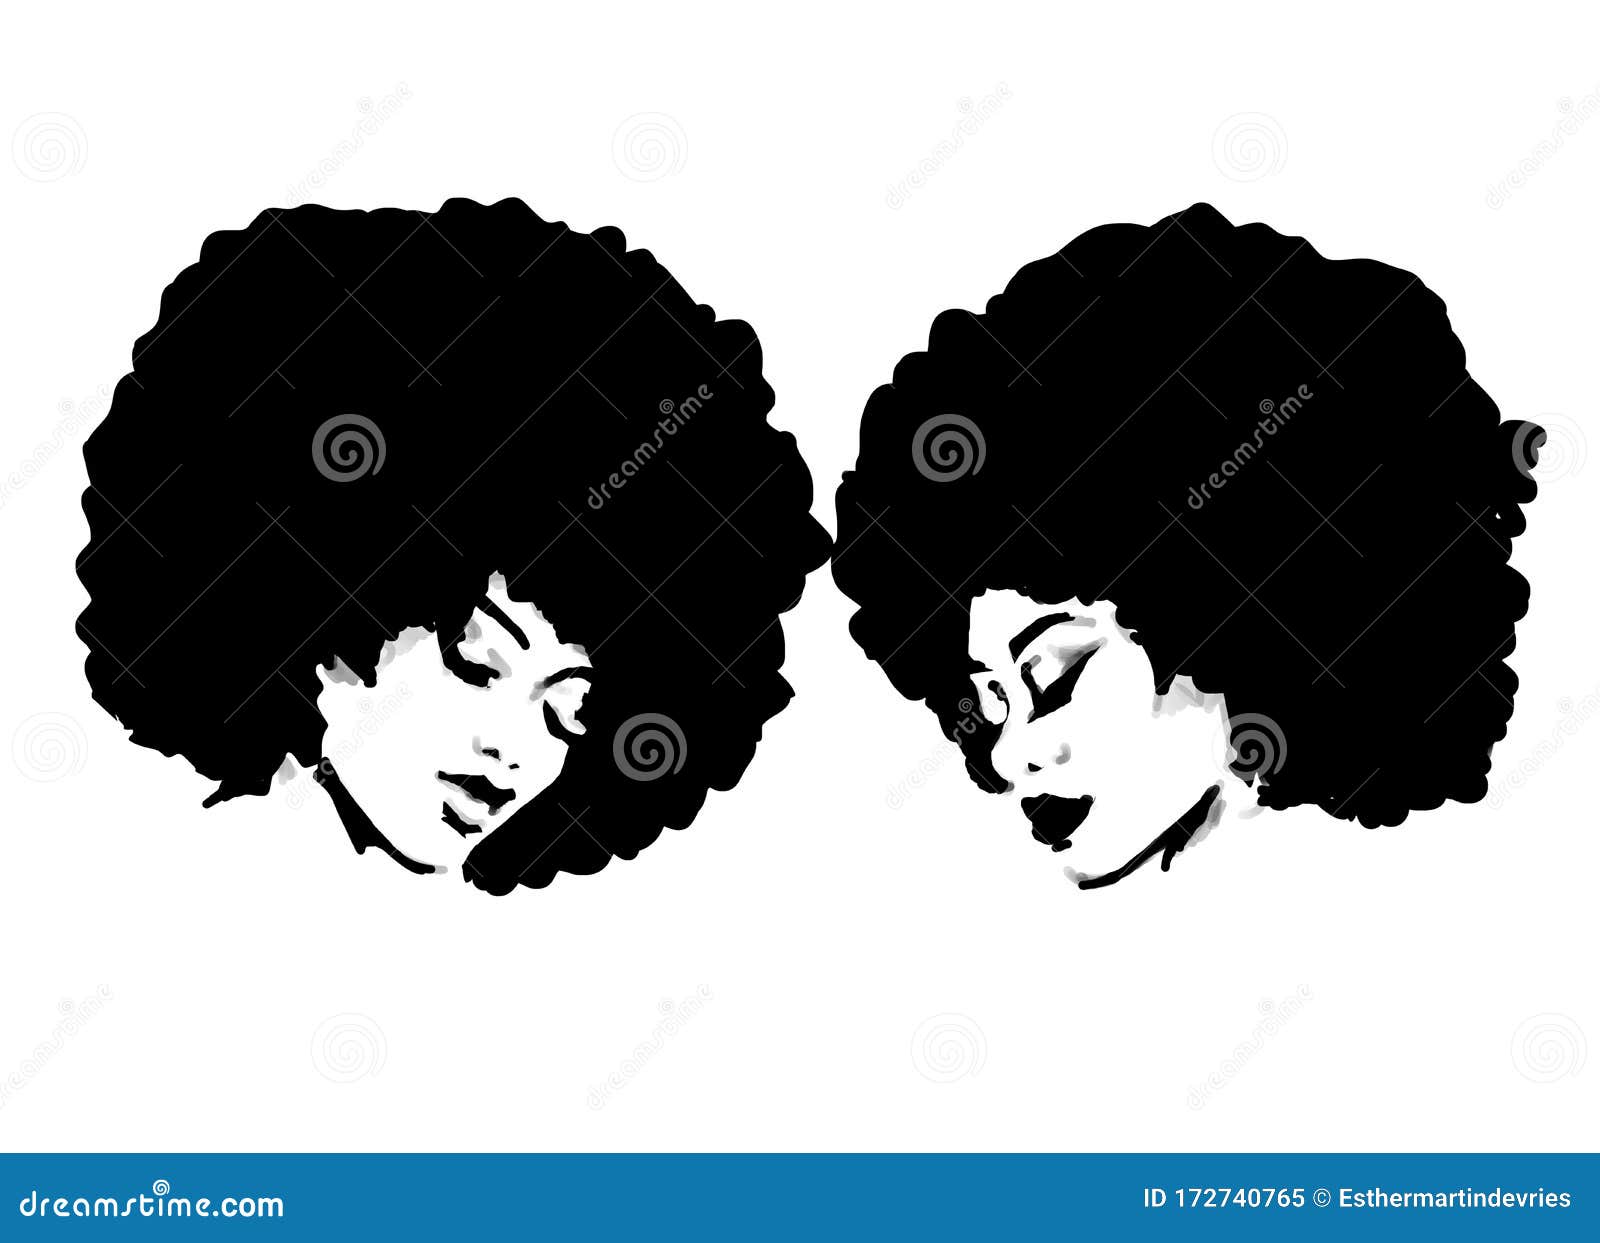 White woman with afro